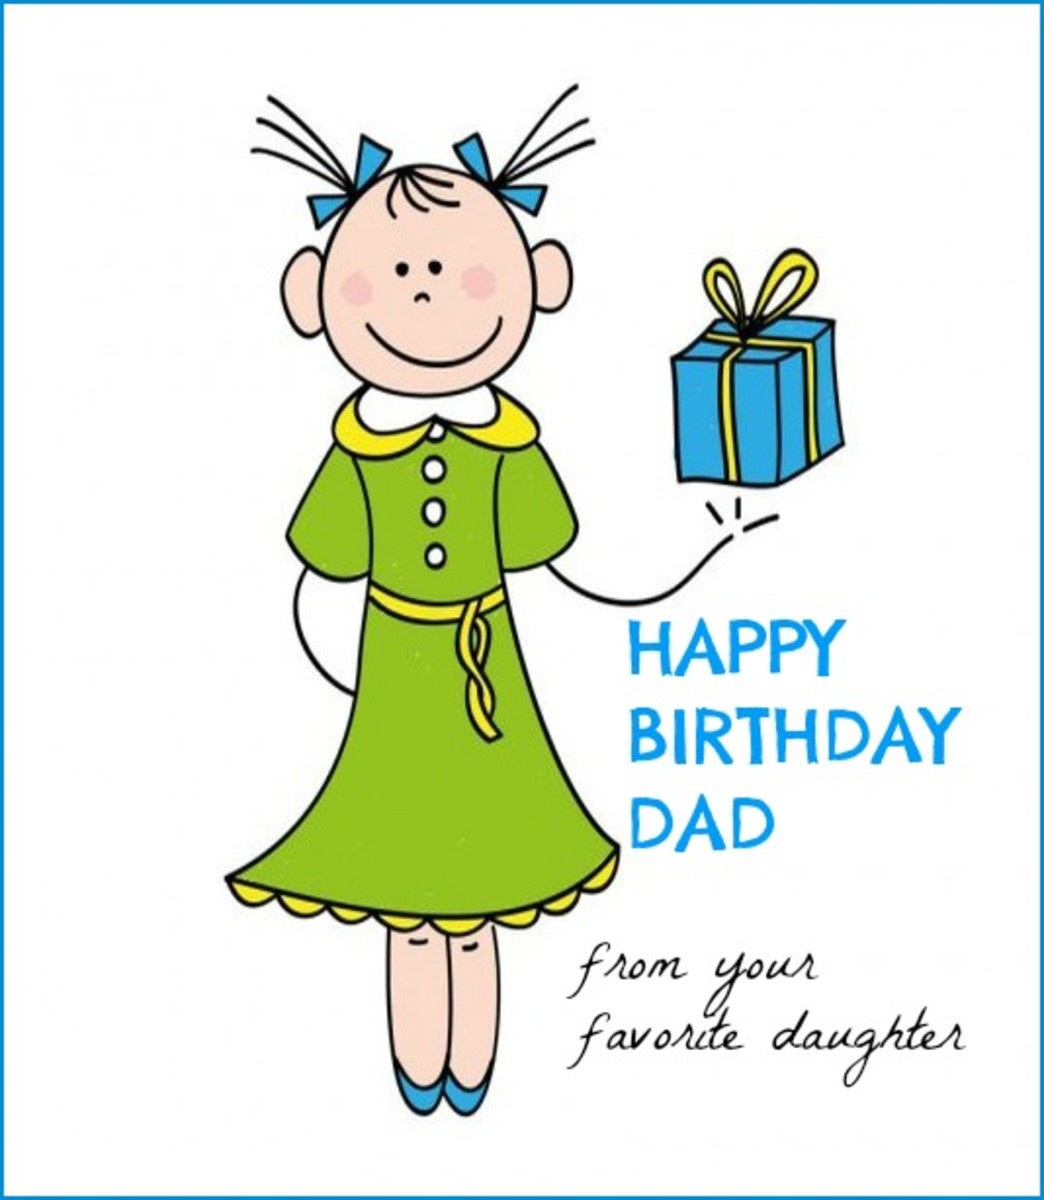 HAPPY BIRTHDAY DAD Free Birthday Greetings, Cards & Messages HubPages